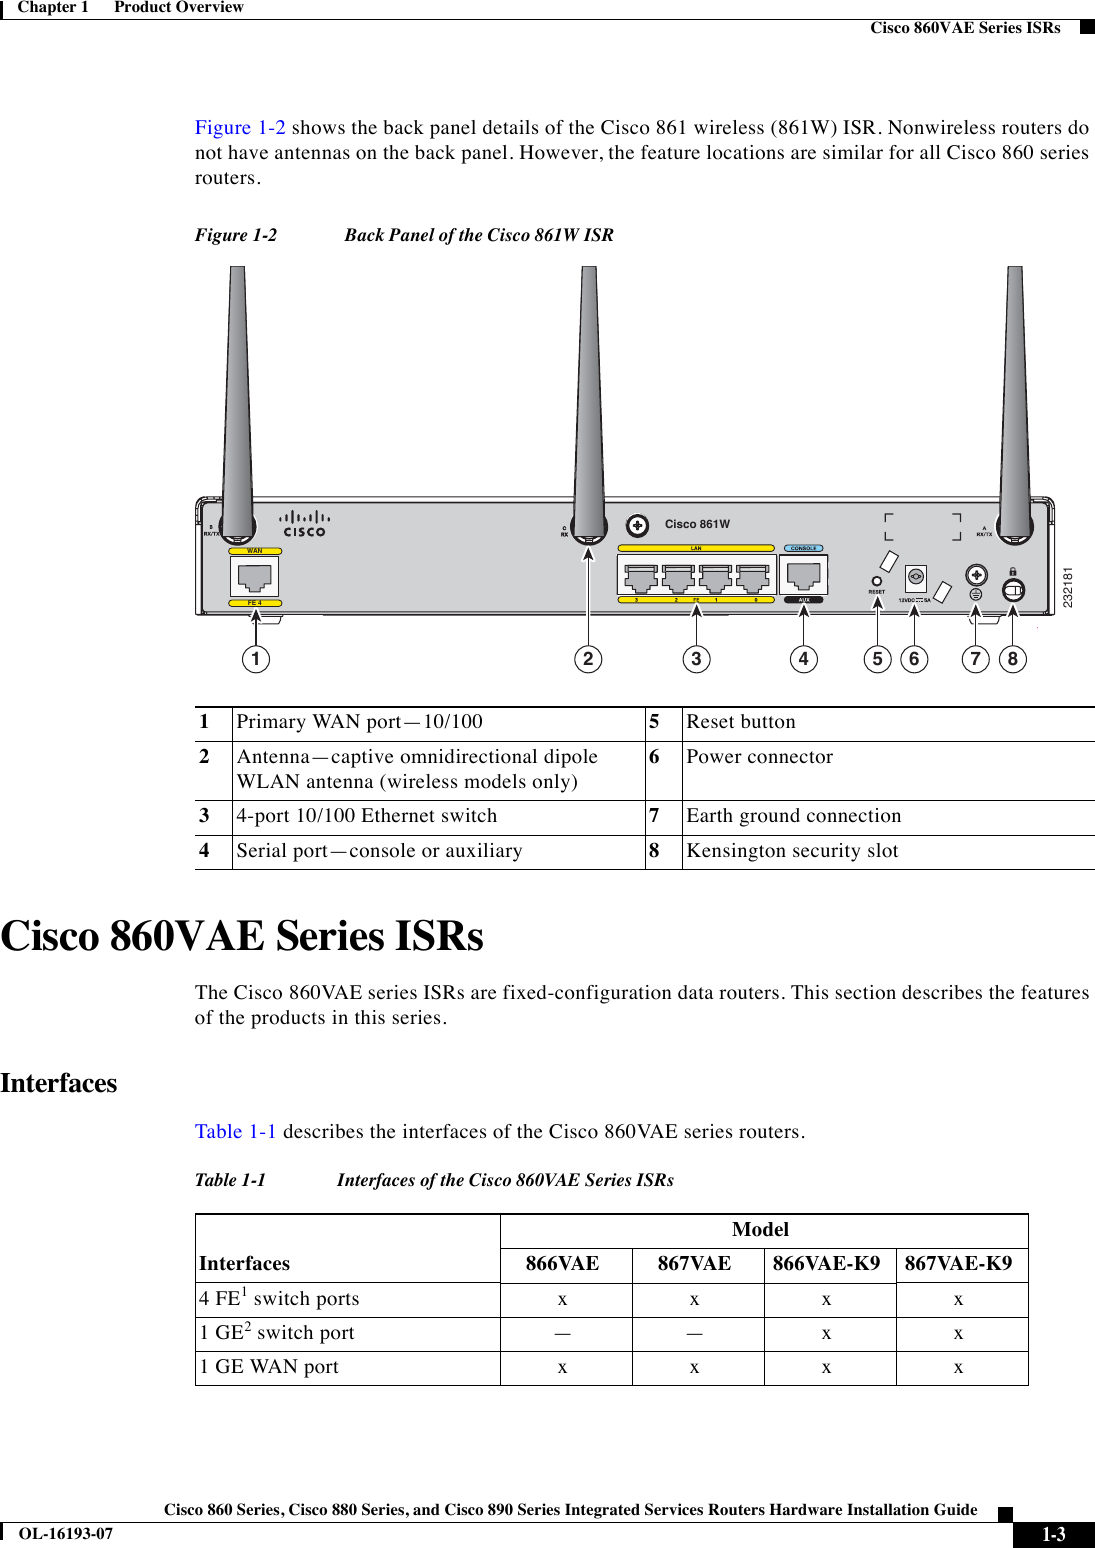  1-3Cisco 860 Series, Cisco 880 Series, and Cisco 890 Series Integrated Services Routers Hardware Installation GuideOL-16193-07Chapter 1      Product Overview  Cisco 860VAE Series ISRsFigure 1-2 shows the back panel details of the Cisco 861 wireless (861W) ISR. Nonwireless routers do not have antennas on the back panel. However, the feature locations are similar for all Cisco 860 series routers.Figure 1-2 Back Panel of the Cisco 861W ISRCisco 860VAE Series ISRsThe Cisco 860VAE series ISRs are fixed-configuration data routers. This section describes the features of the products in this series.InterfacesTable 1-1 describes the interfaces of the Cisco 860VAE series routers.1Primary WAN port—10/100  5Reset button2Antenna—captive omnidirectional dipole WLAN antenna (wireless models only)6Power connector34-port 10/100 Ethernet switch 7Earth ground connection4Serial port—console or auxiliary 8Kensington security slot23218131 4 6 7 852WANFE 4Cisco 861WTabl e 1-1 Interfaces of the Cisco 860VAE Series ISRsInterfacesModel866VAE 867VAE 866VAE-K9 867VAE-K94 FE1 switch ports xxxx1 GE2 switch port — — x x1 GE WAN port xxxx